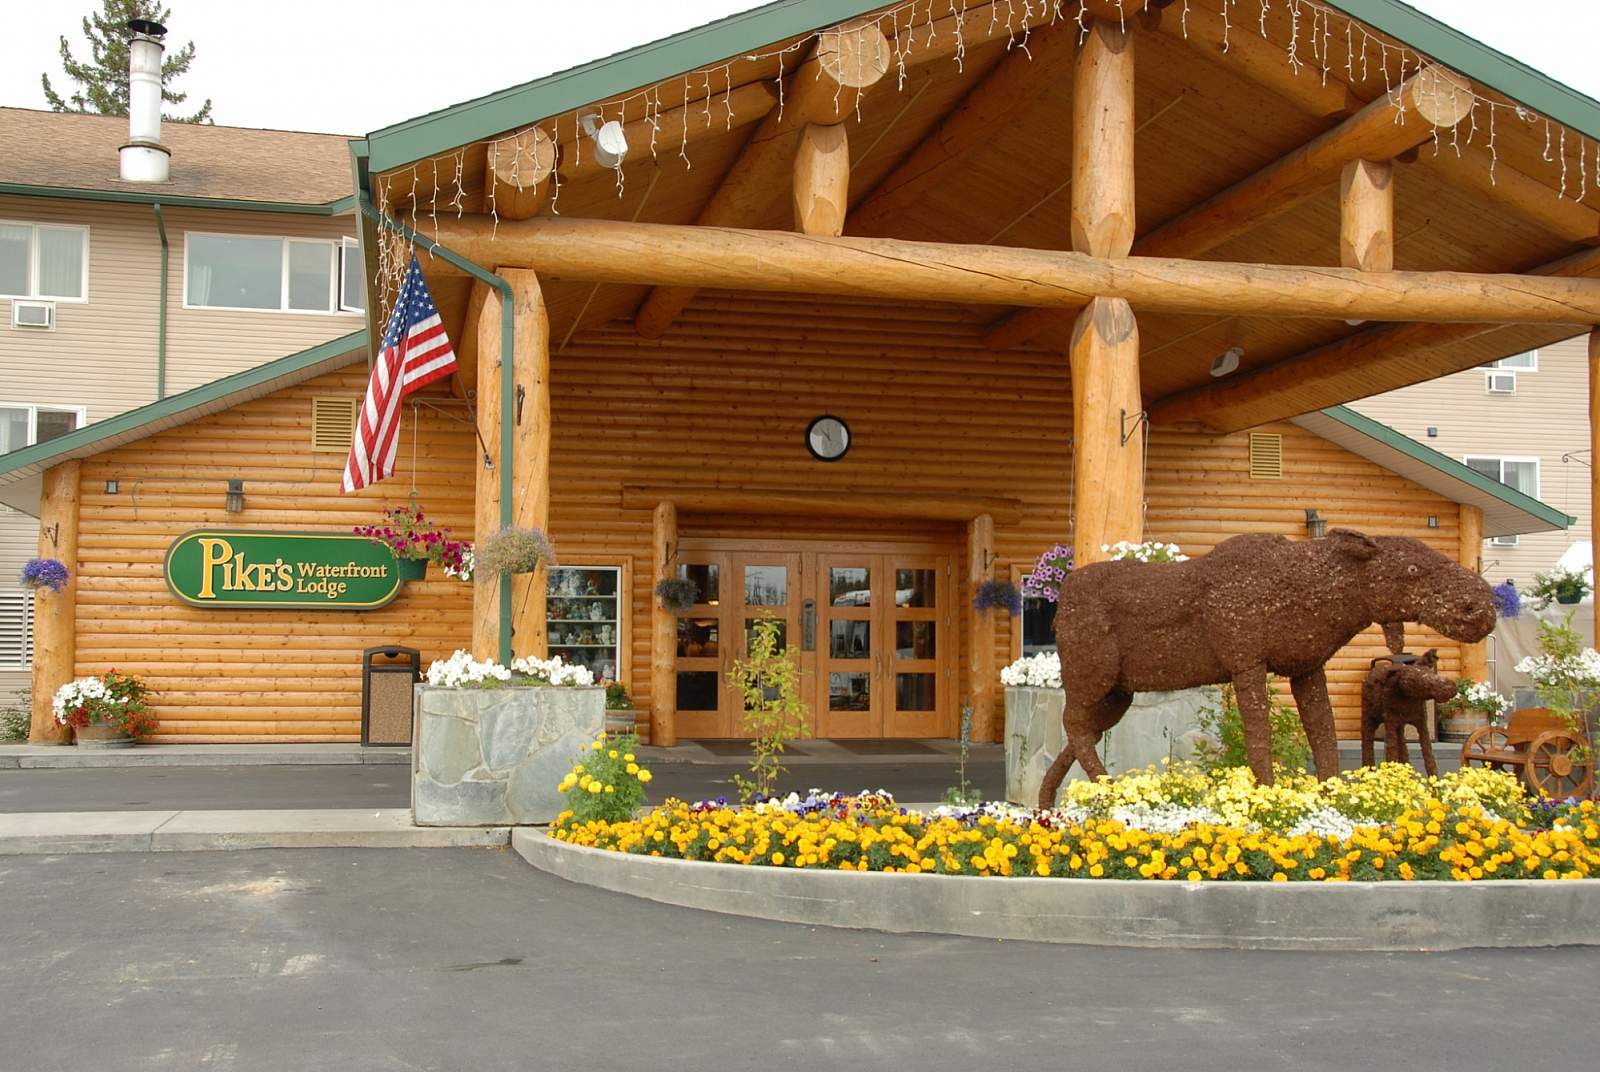 Pike’s Waterfront Lodge is a nice place to stay in Alaska.
Pictured: Alaska hotel